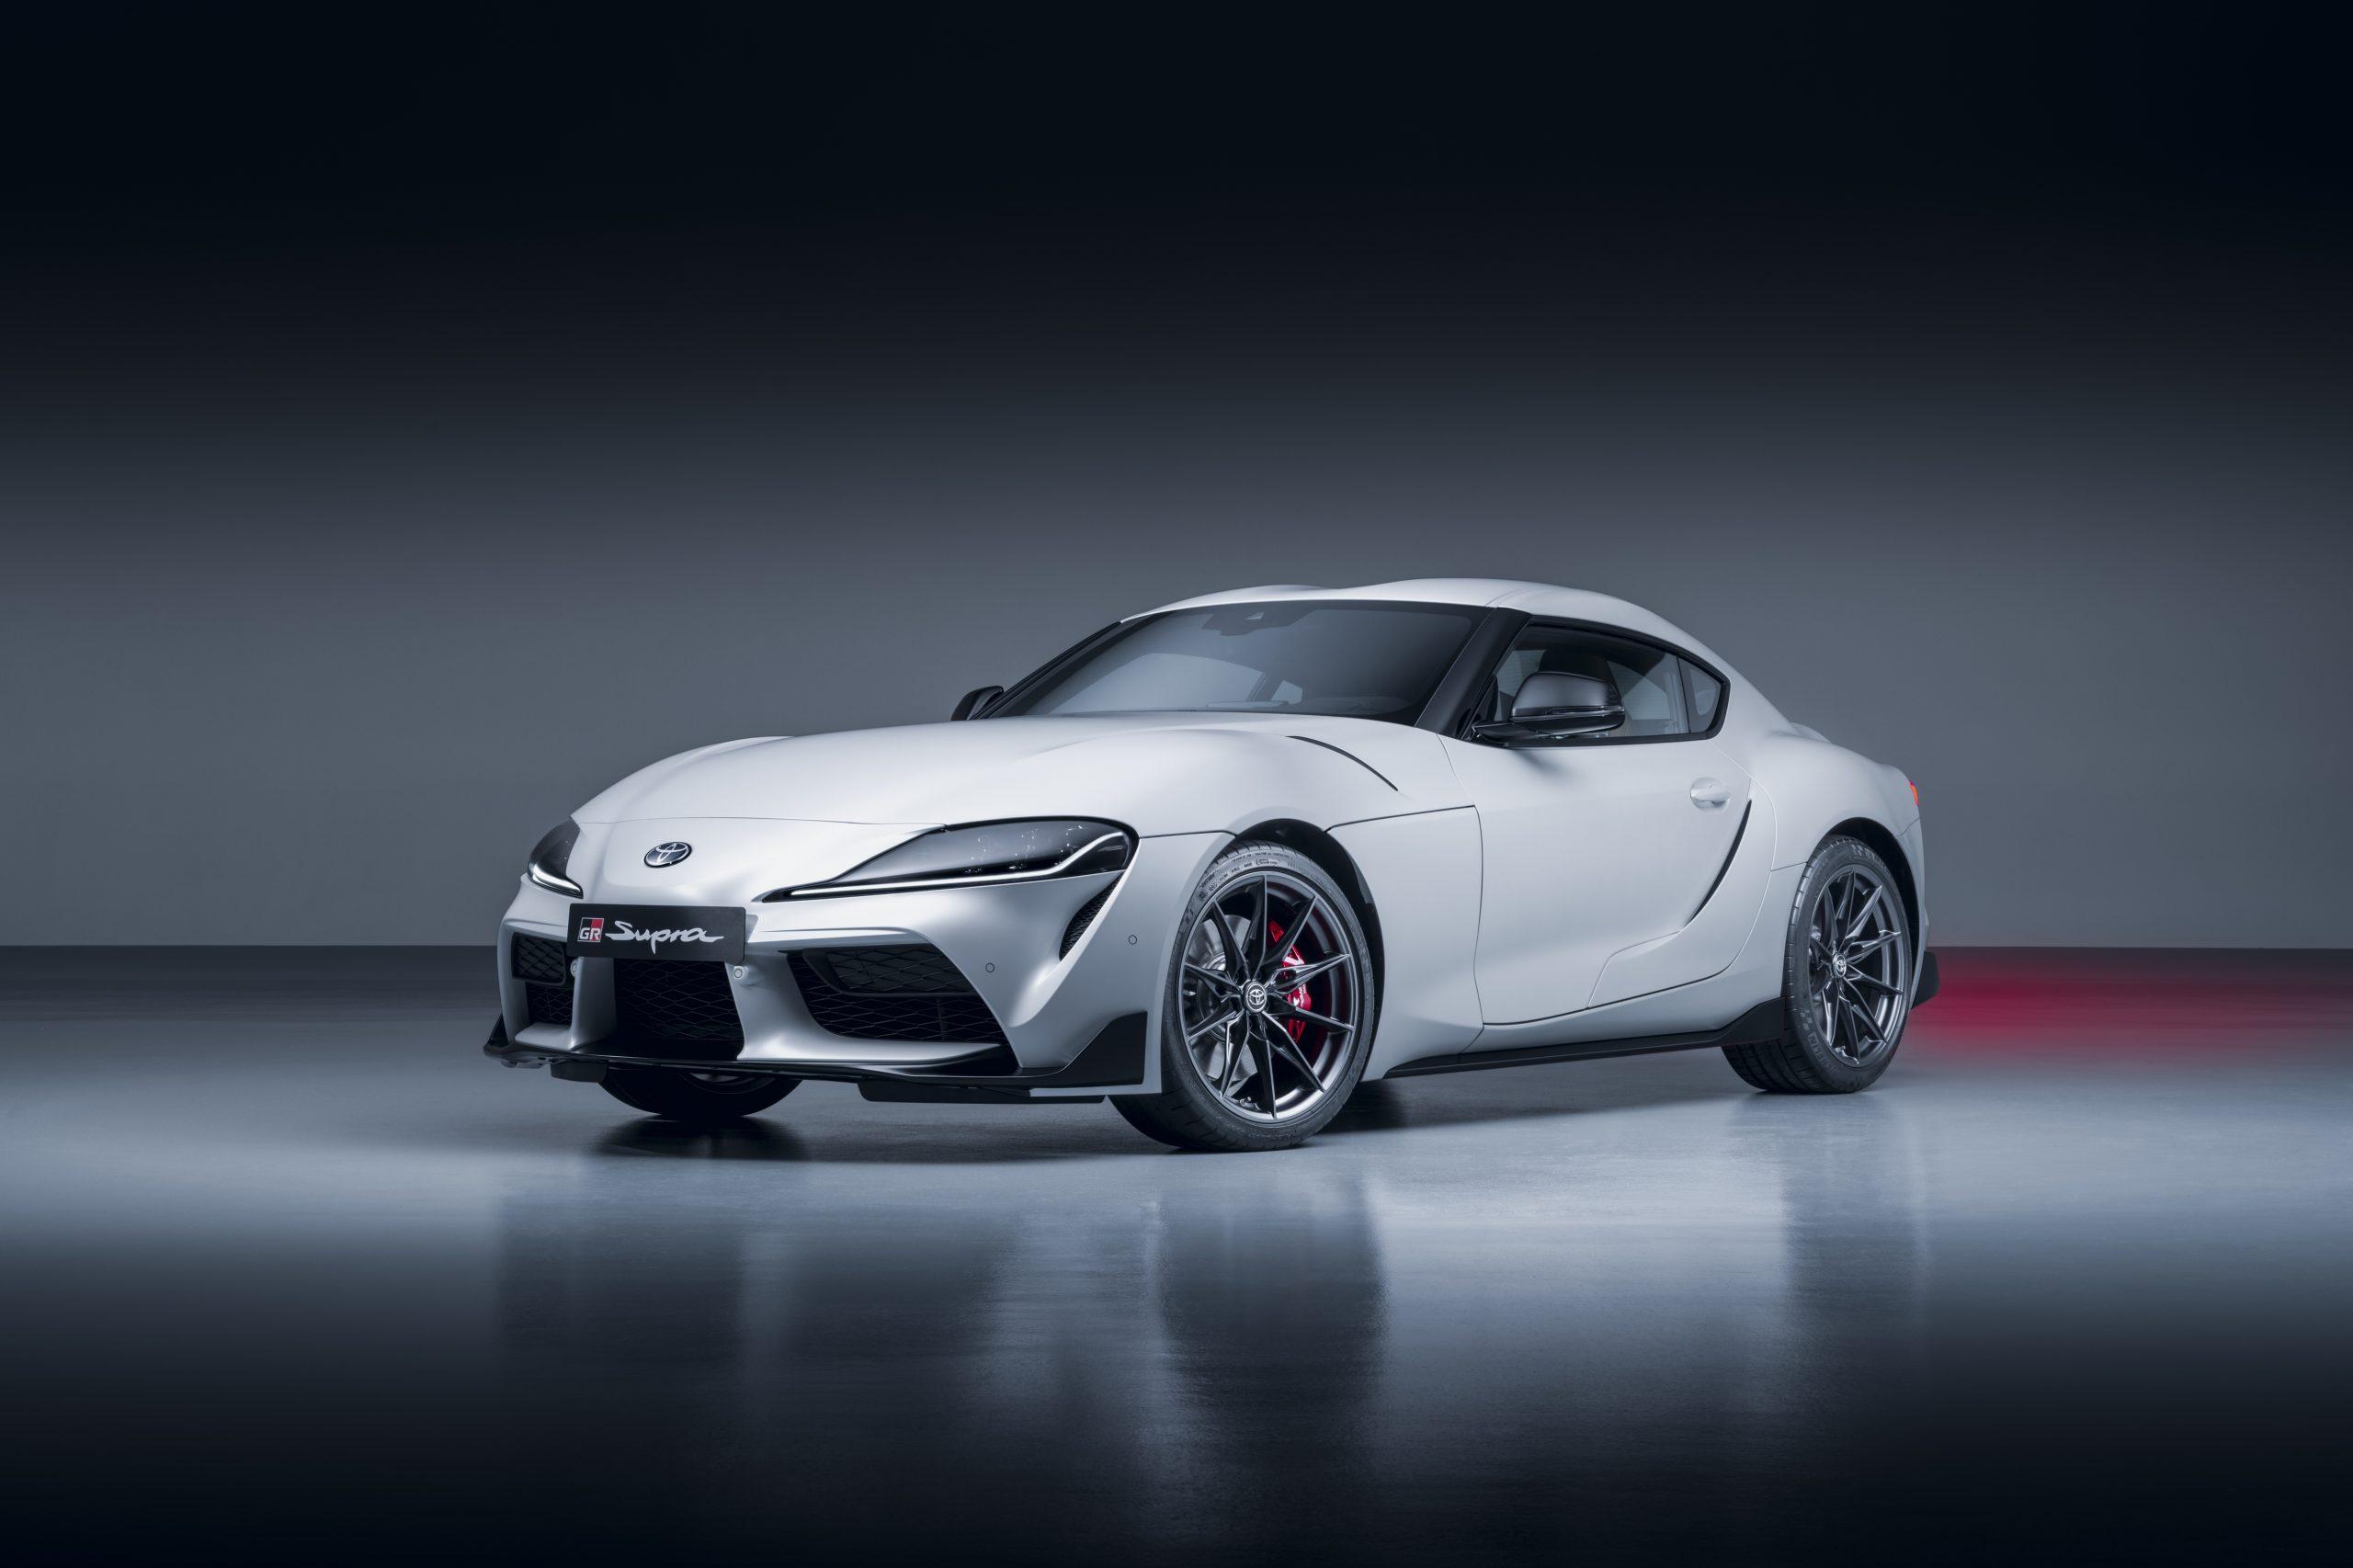 A car for driving purists: the new Toyota GR Supra with manual transmission